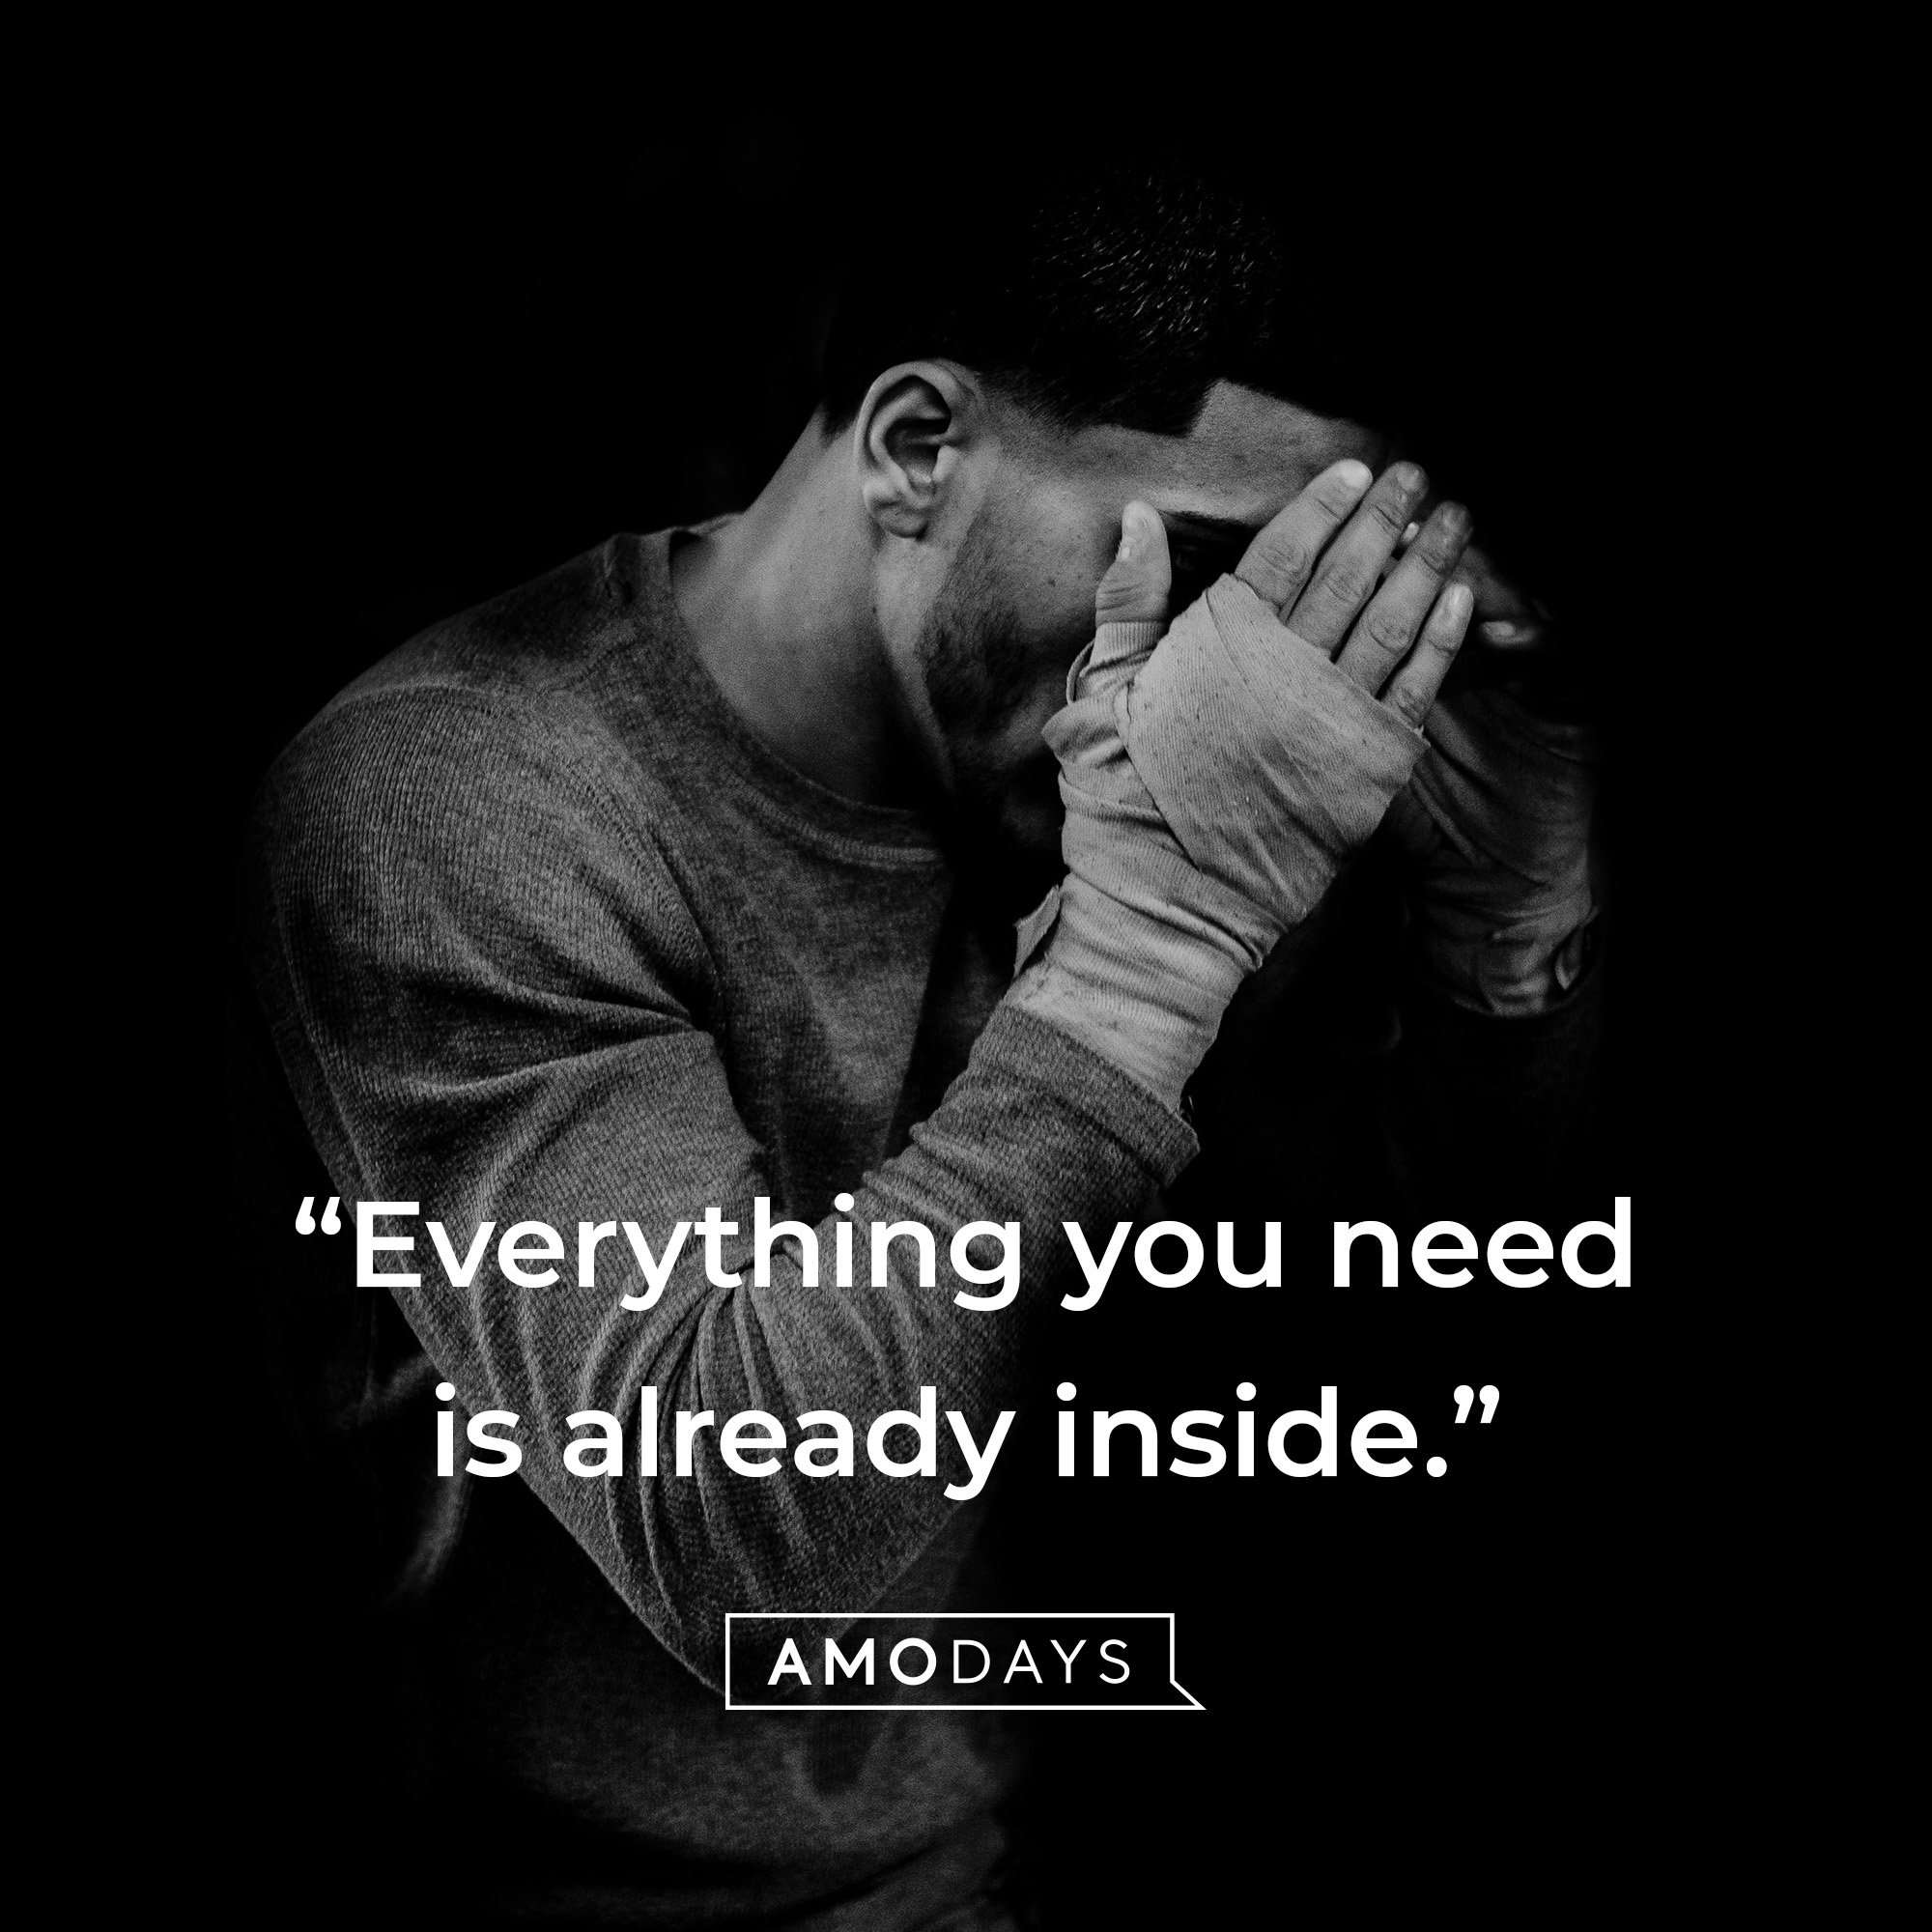 Nike’s quote: “Everything you need is already inside.” | Source: AmoDays